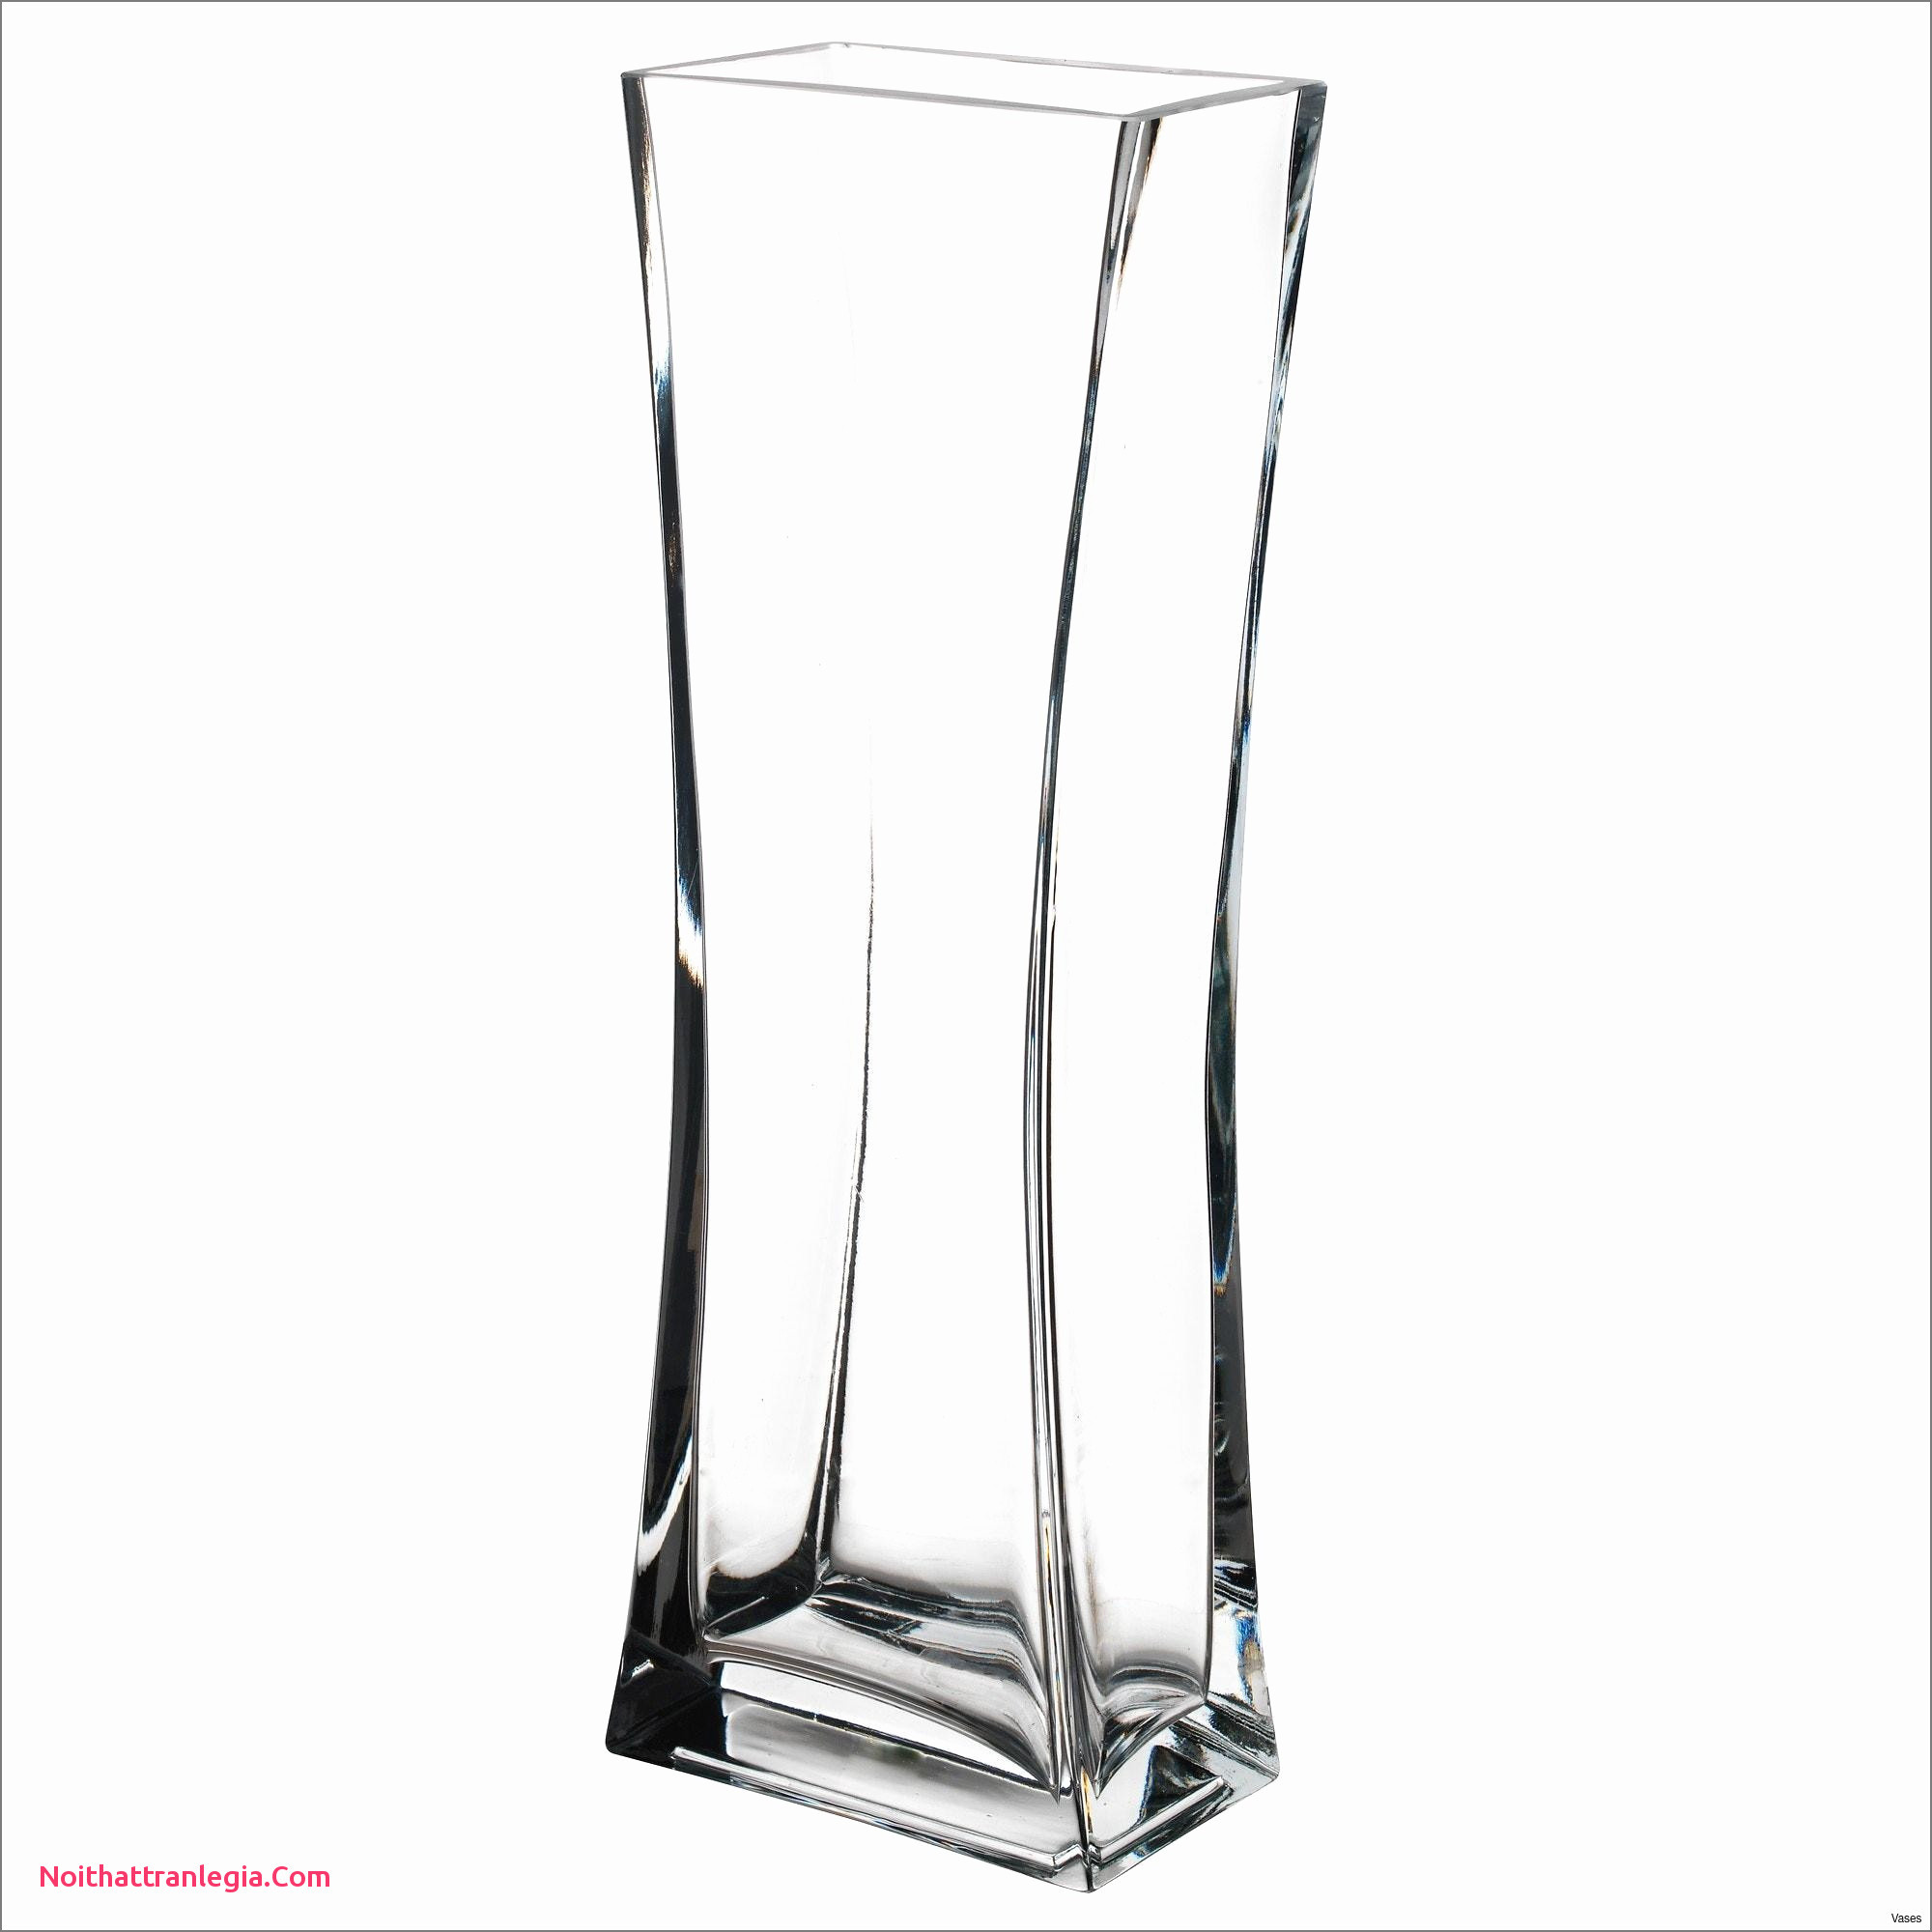 25 Popular Extra Large Silver Vase 2024 free download extra large silver vase of 20 large floor vase nz noithattranlegia vases design pertaining to home design elegant floor vase ikea floor vase ikea luxury 50 luxury ikea sofa planner